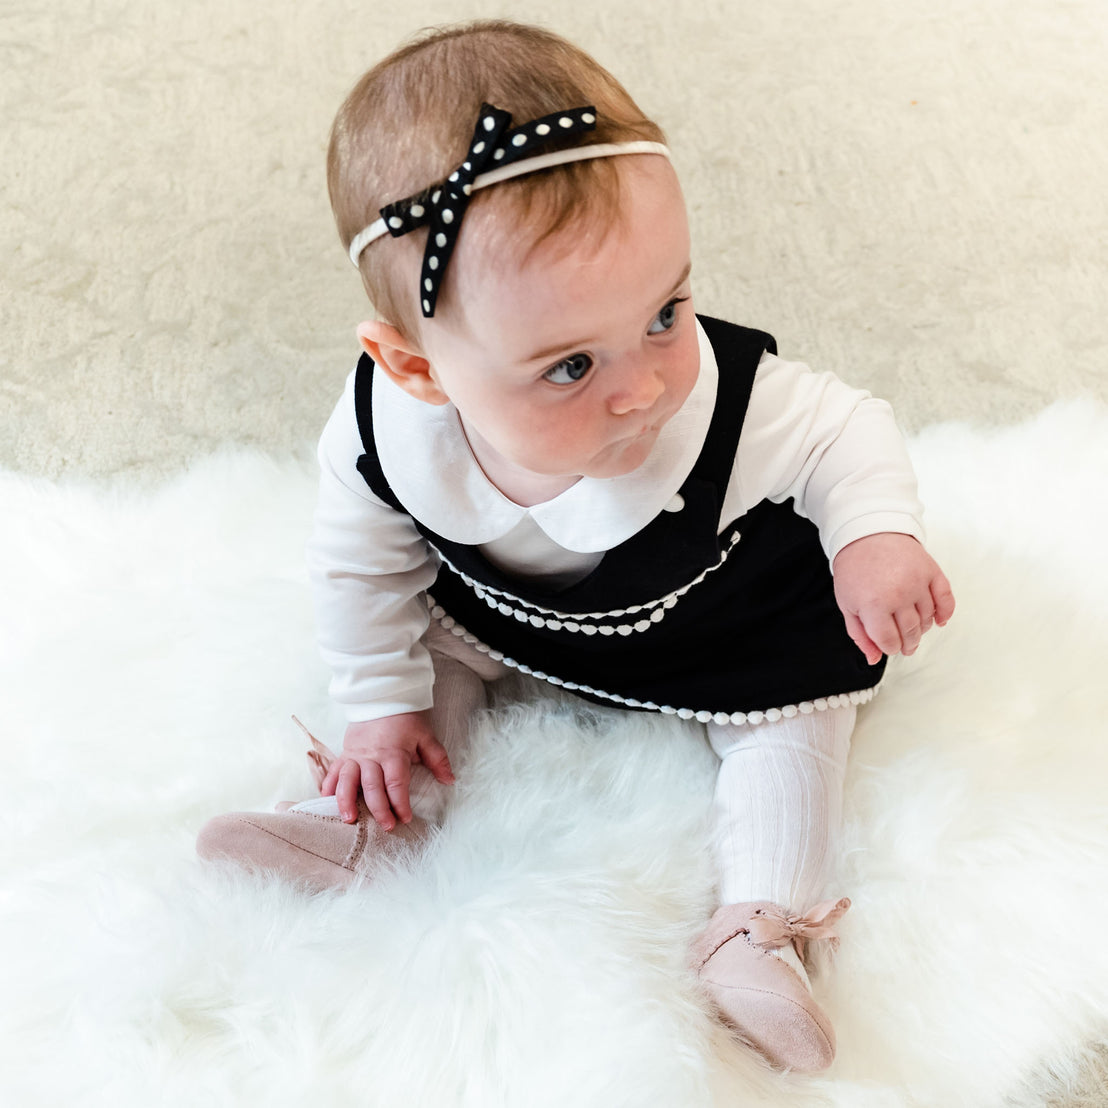 A baby girl in a stylish black and white dress with a June Bow Headband sits on a fluffy white rug, looking curiously to the side. She wears pink shoes and white socks.